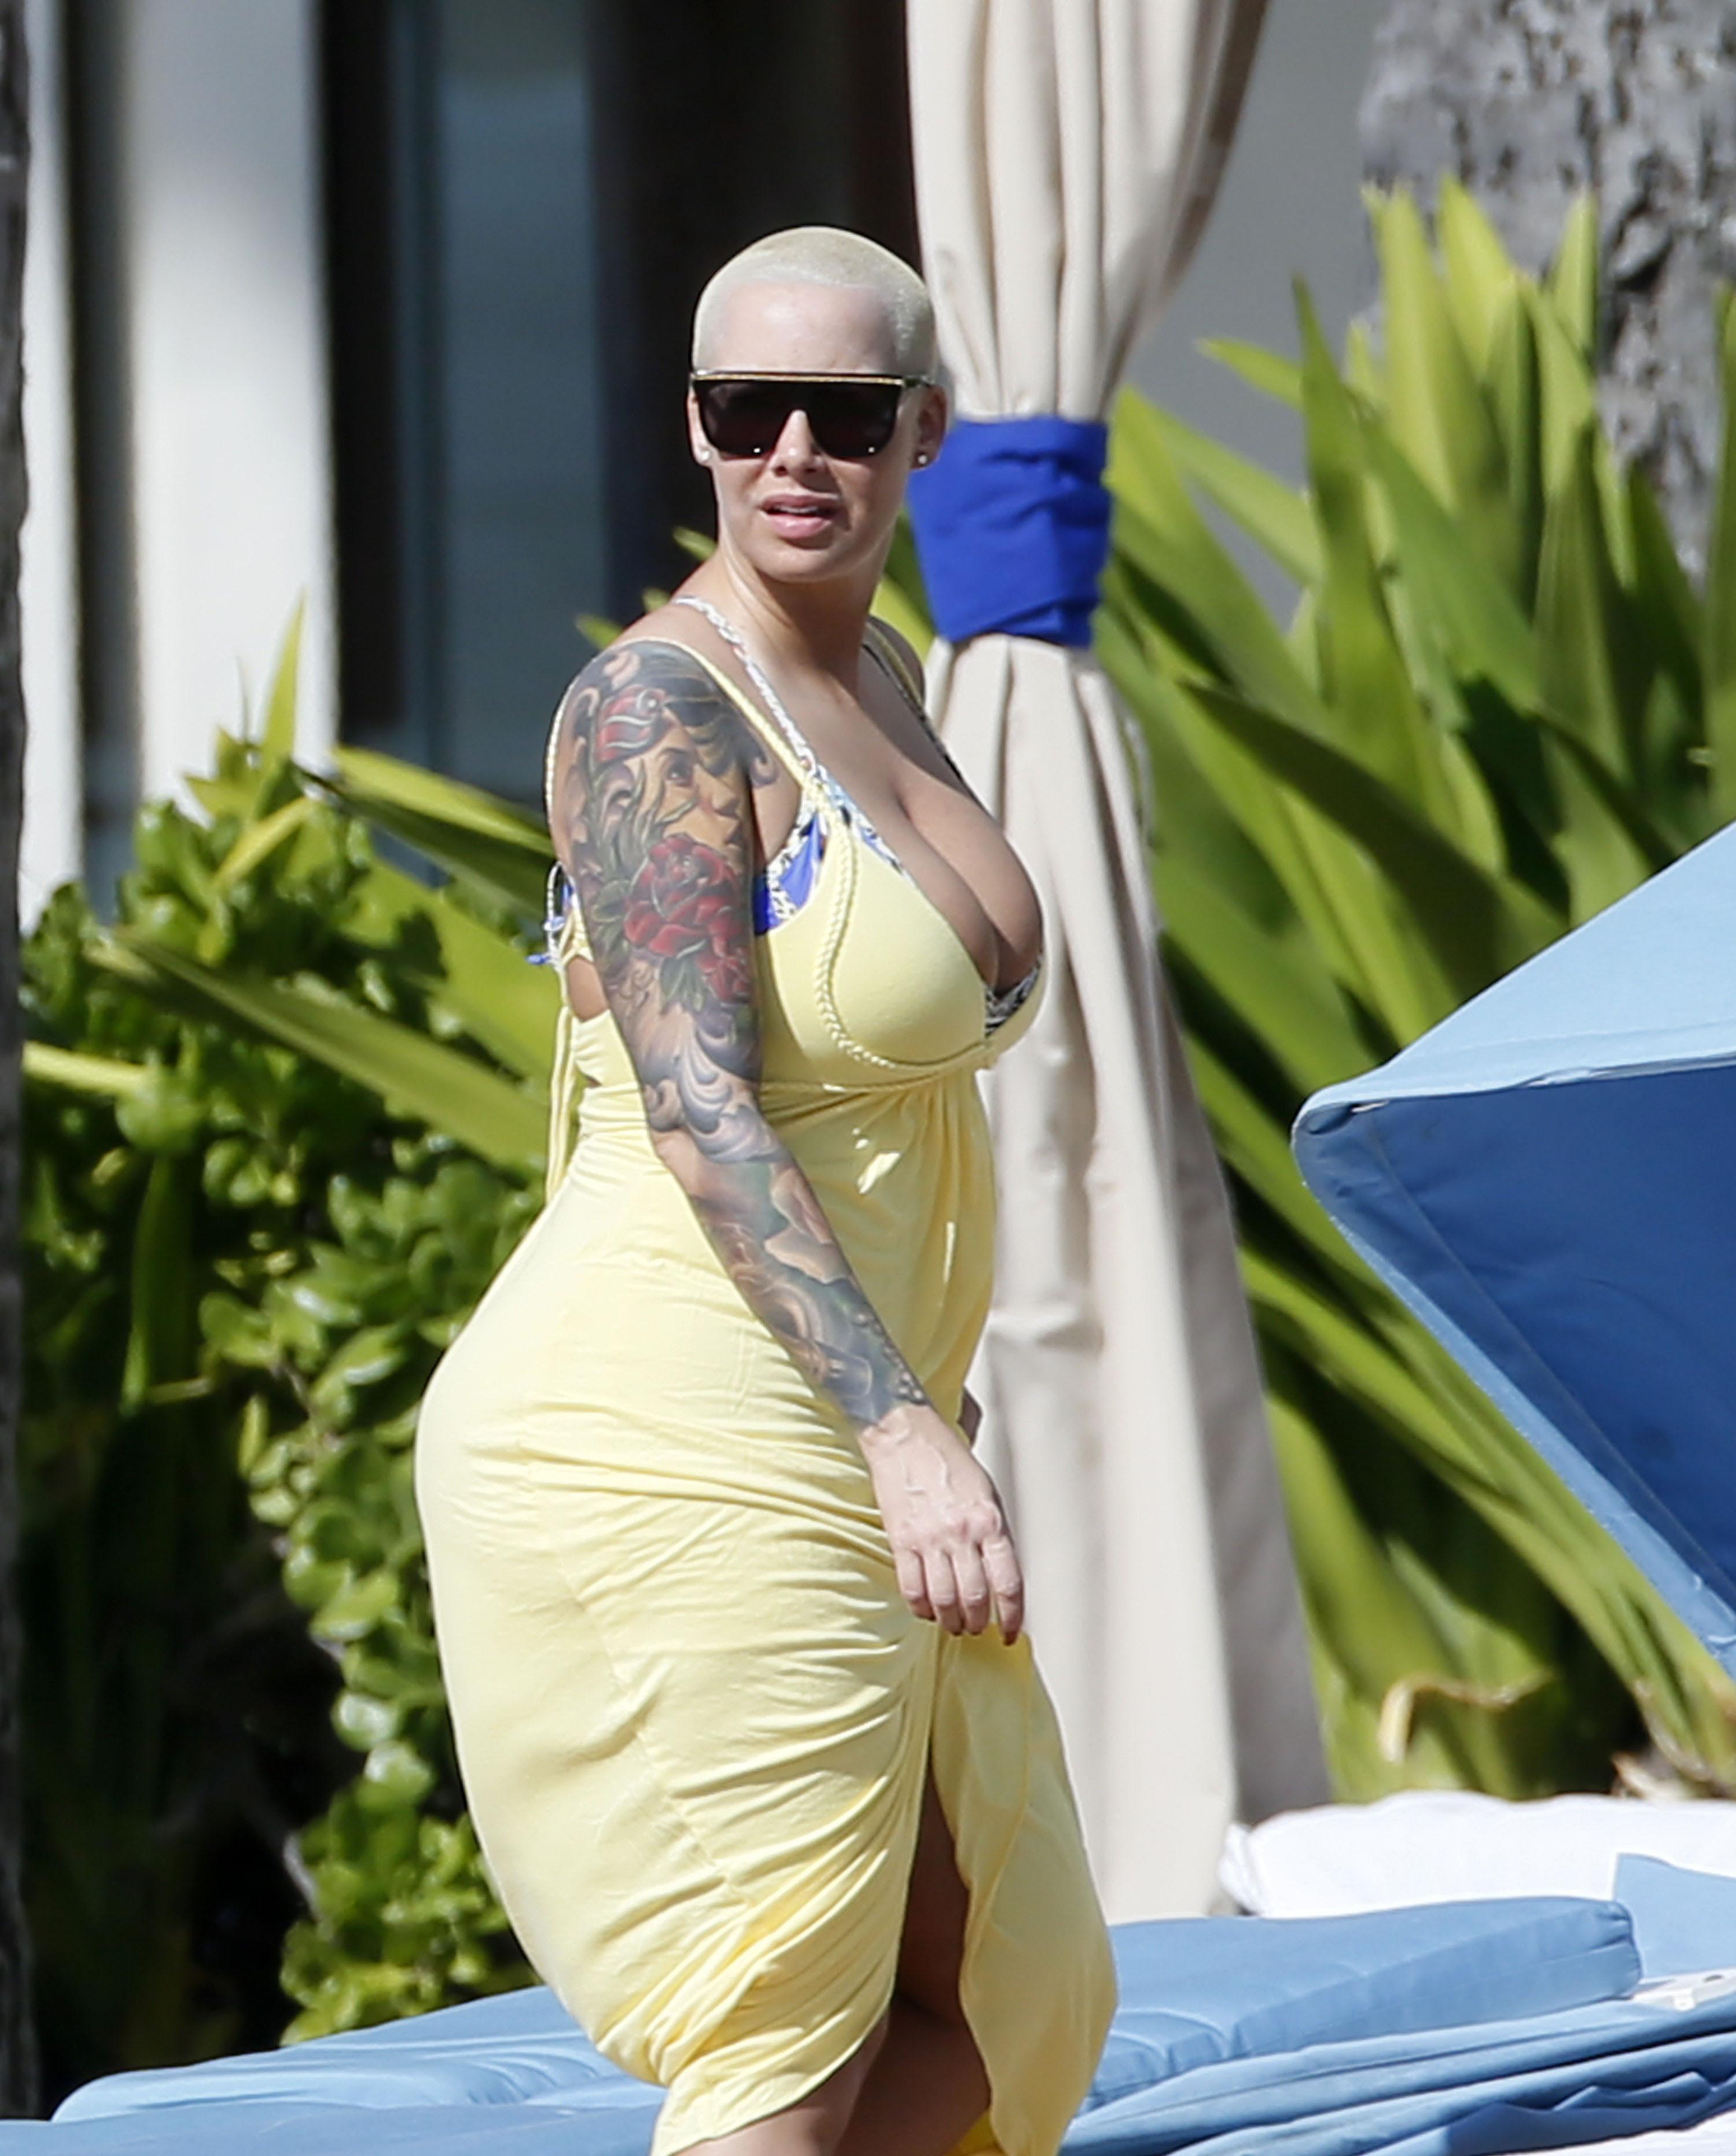 Amber Rose shaved pussy